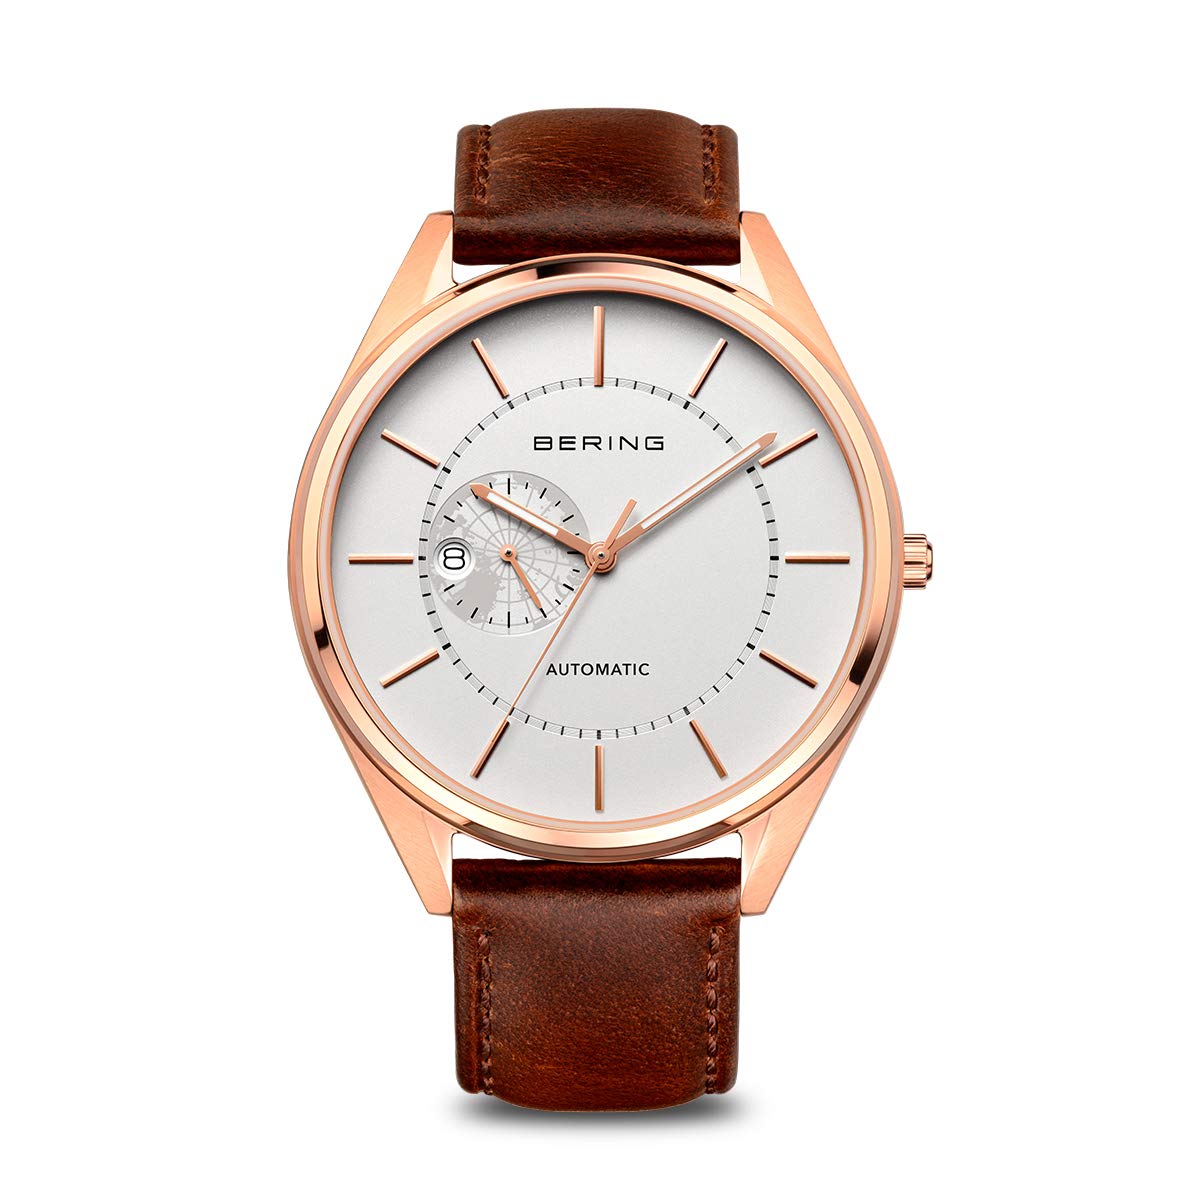 BERING Men Analog automatic collection Watch with Calfskin Leather Strap and Sapphire Crystal 16243-564